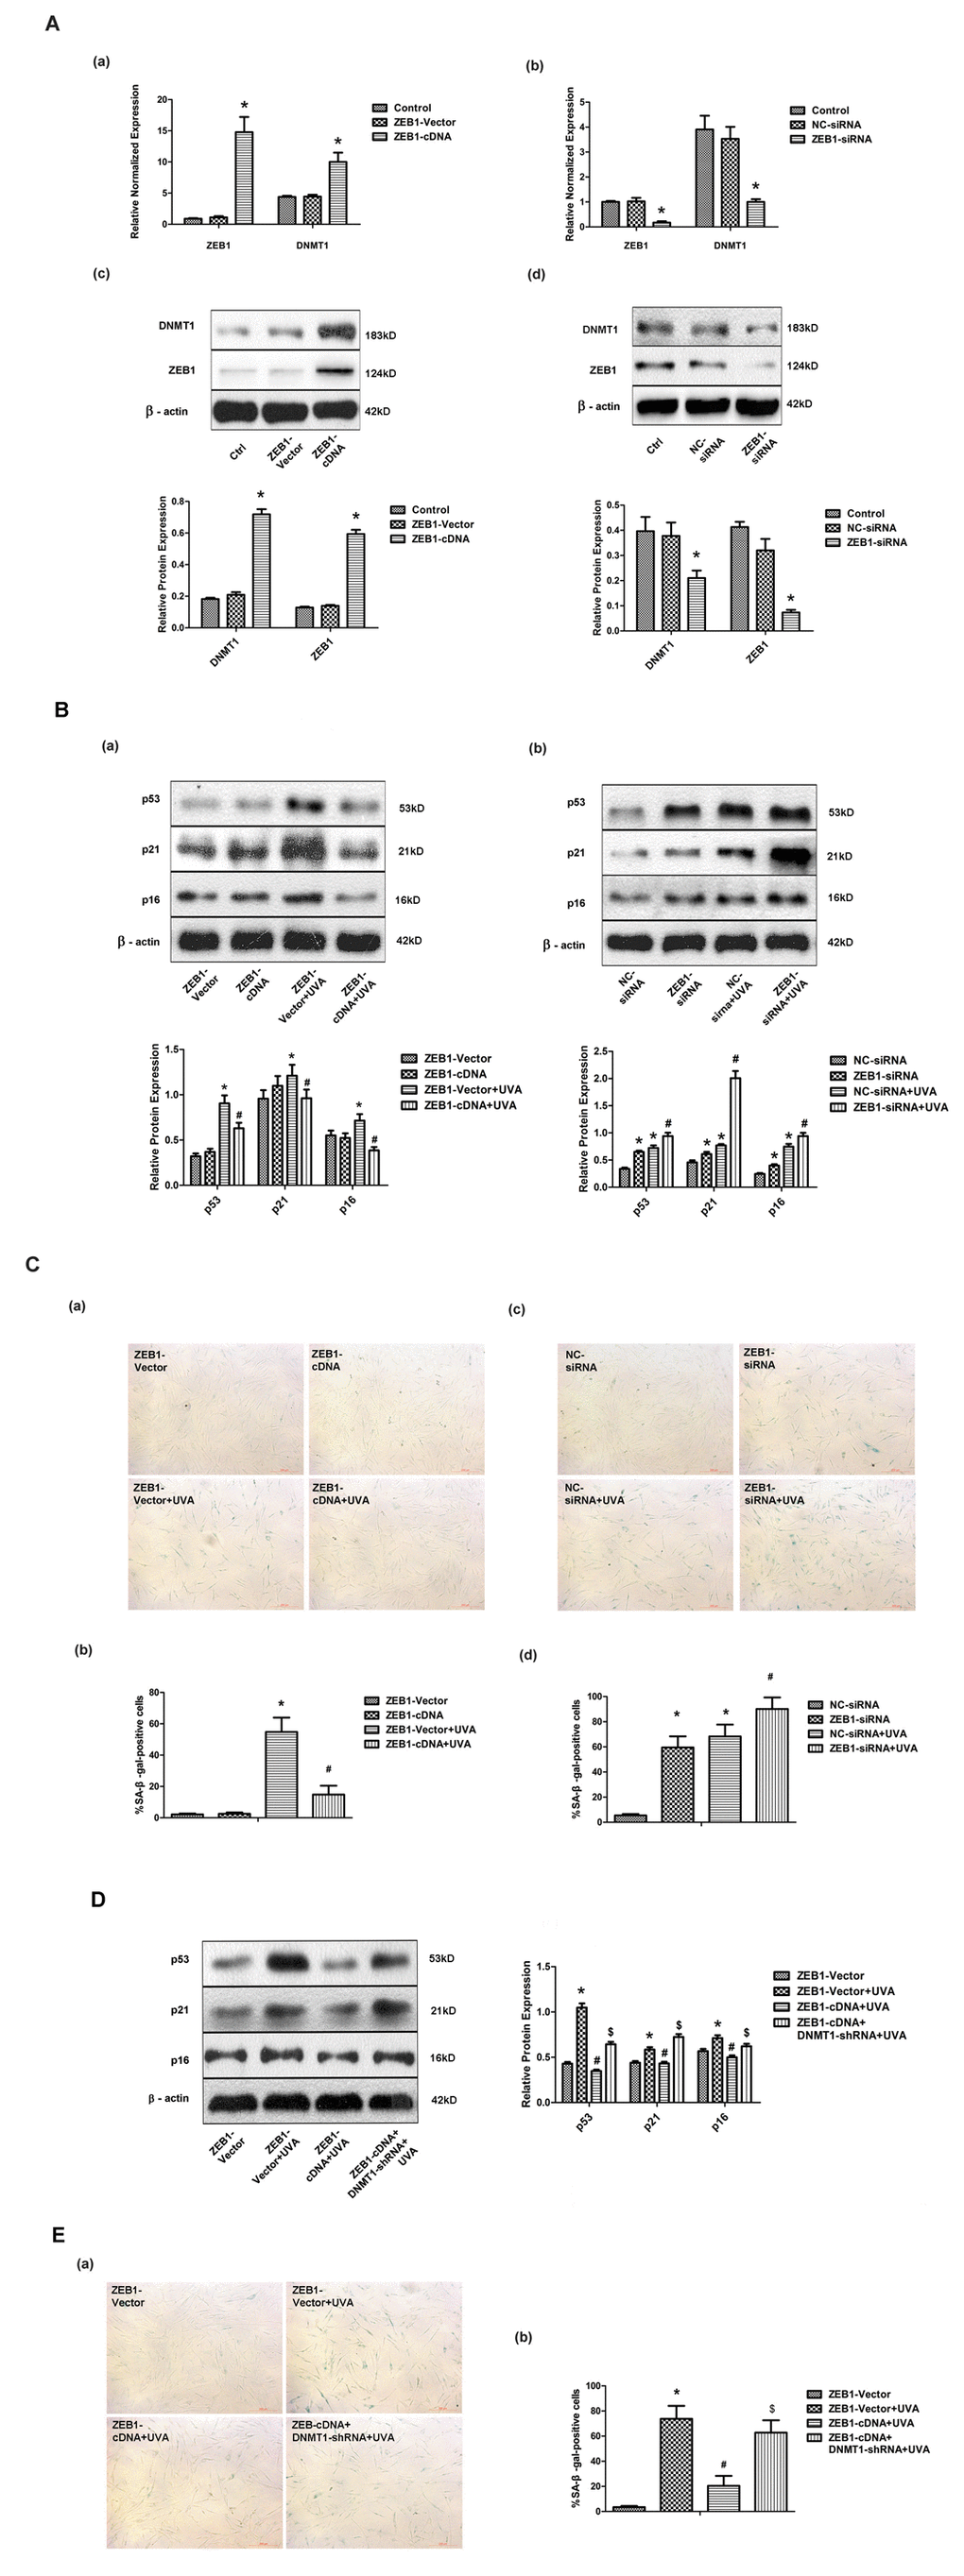 ZEB1 attenuates UVA-induced senescence in HDFs via DNMT1. (A) ZEB1 and DNMT1 expression in HDFs at the mRNA (a, b) and protein (c, d) levels following ZEB1 over-expression or knockdown, as determined by real-time PCR and Western blotting, respectively (n = 3).* vs ZEB1-vector or negative control (NC)-siRNA, PB) Western blots images (upper panels) and quantitative analysis (lower panels), representative of three independent experiments, were showing p53, p21, and p16 protein expression. (C) Senescence-associated β-galactosidase(SA-β-gal) activity of cells under the indicated conditions. Representative images are shown (scale bar = 200 µm). The percentages of SA-β-galpositive cells under each condition are presented as the mean ± standard deviation of three independent experiments. * vs ZEB1-vector or NC-siRNA, P D) Western blots images (left panels) and quantitative analysis (right panels), representative of three independent experiments, showing p53, p21, and p16 protein expression in HDFs co-transfected with ZEB1-cDNA and DNMT1-shRNA. (E) SA-β-gal activity of cells under the indicated conditions, following DNMT1 knockdown. Cells were analyzed as described in (C). * vs ZEB1-vector, P 